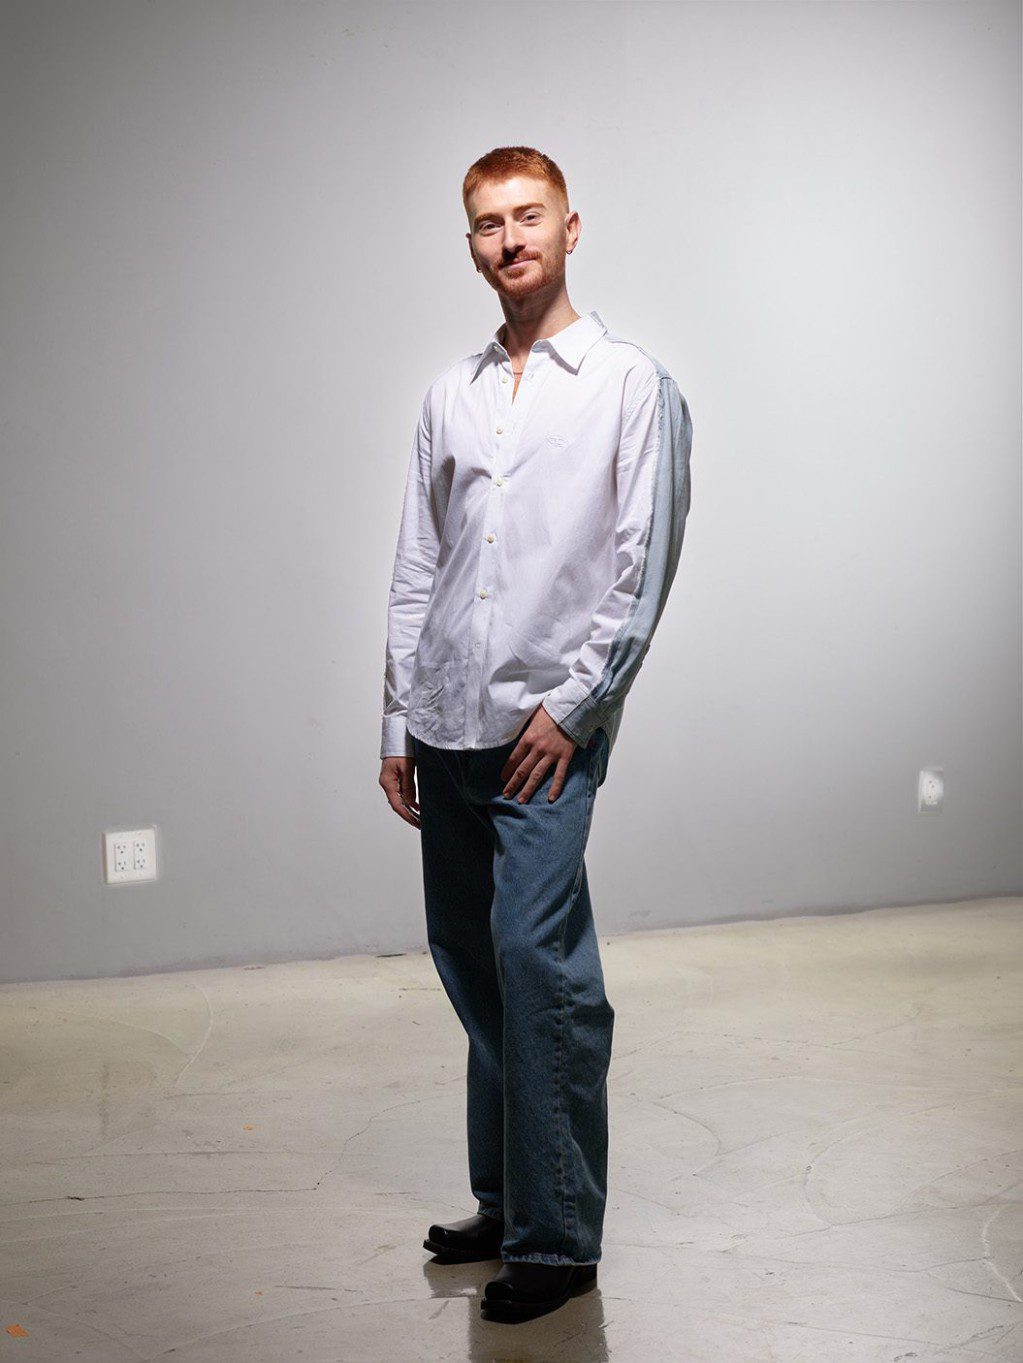 David poses for the camera; they are a tall, non-disabled person with fair skin, red hair and gold jewelry with a white collared shirt and blue jeans.